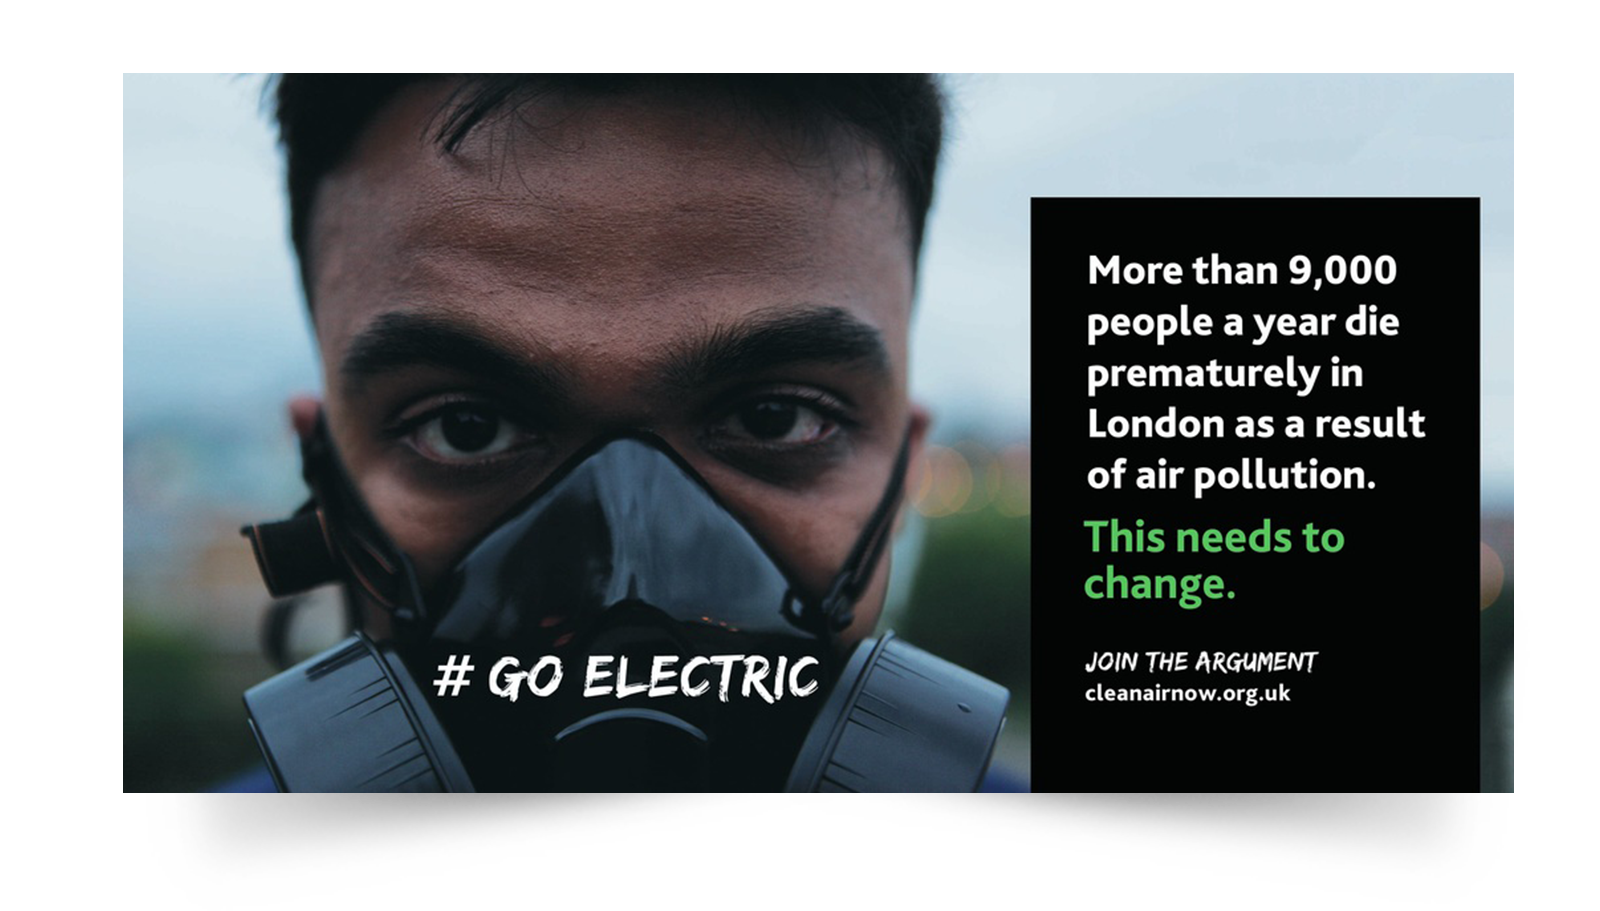 Pro- electric billboard from the campaign | (by www.cleanairnow.org.uk)